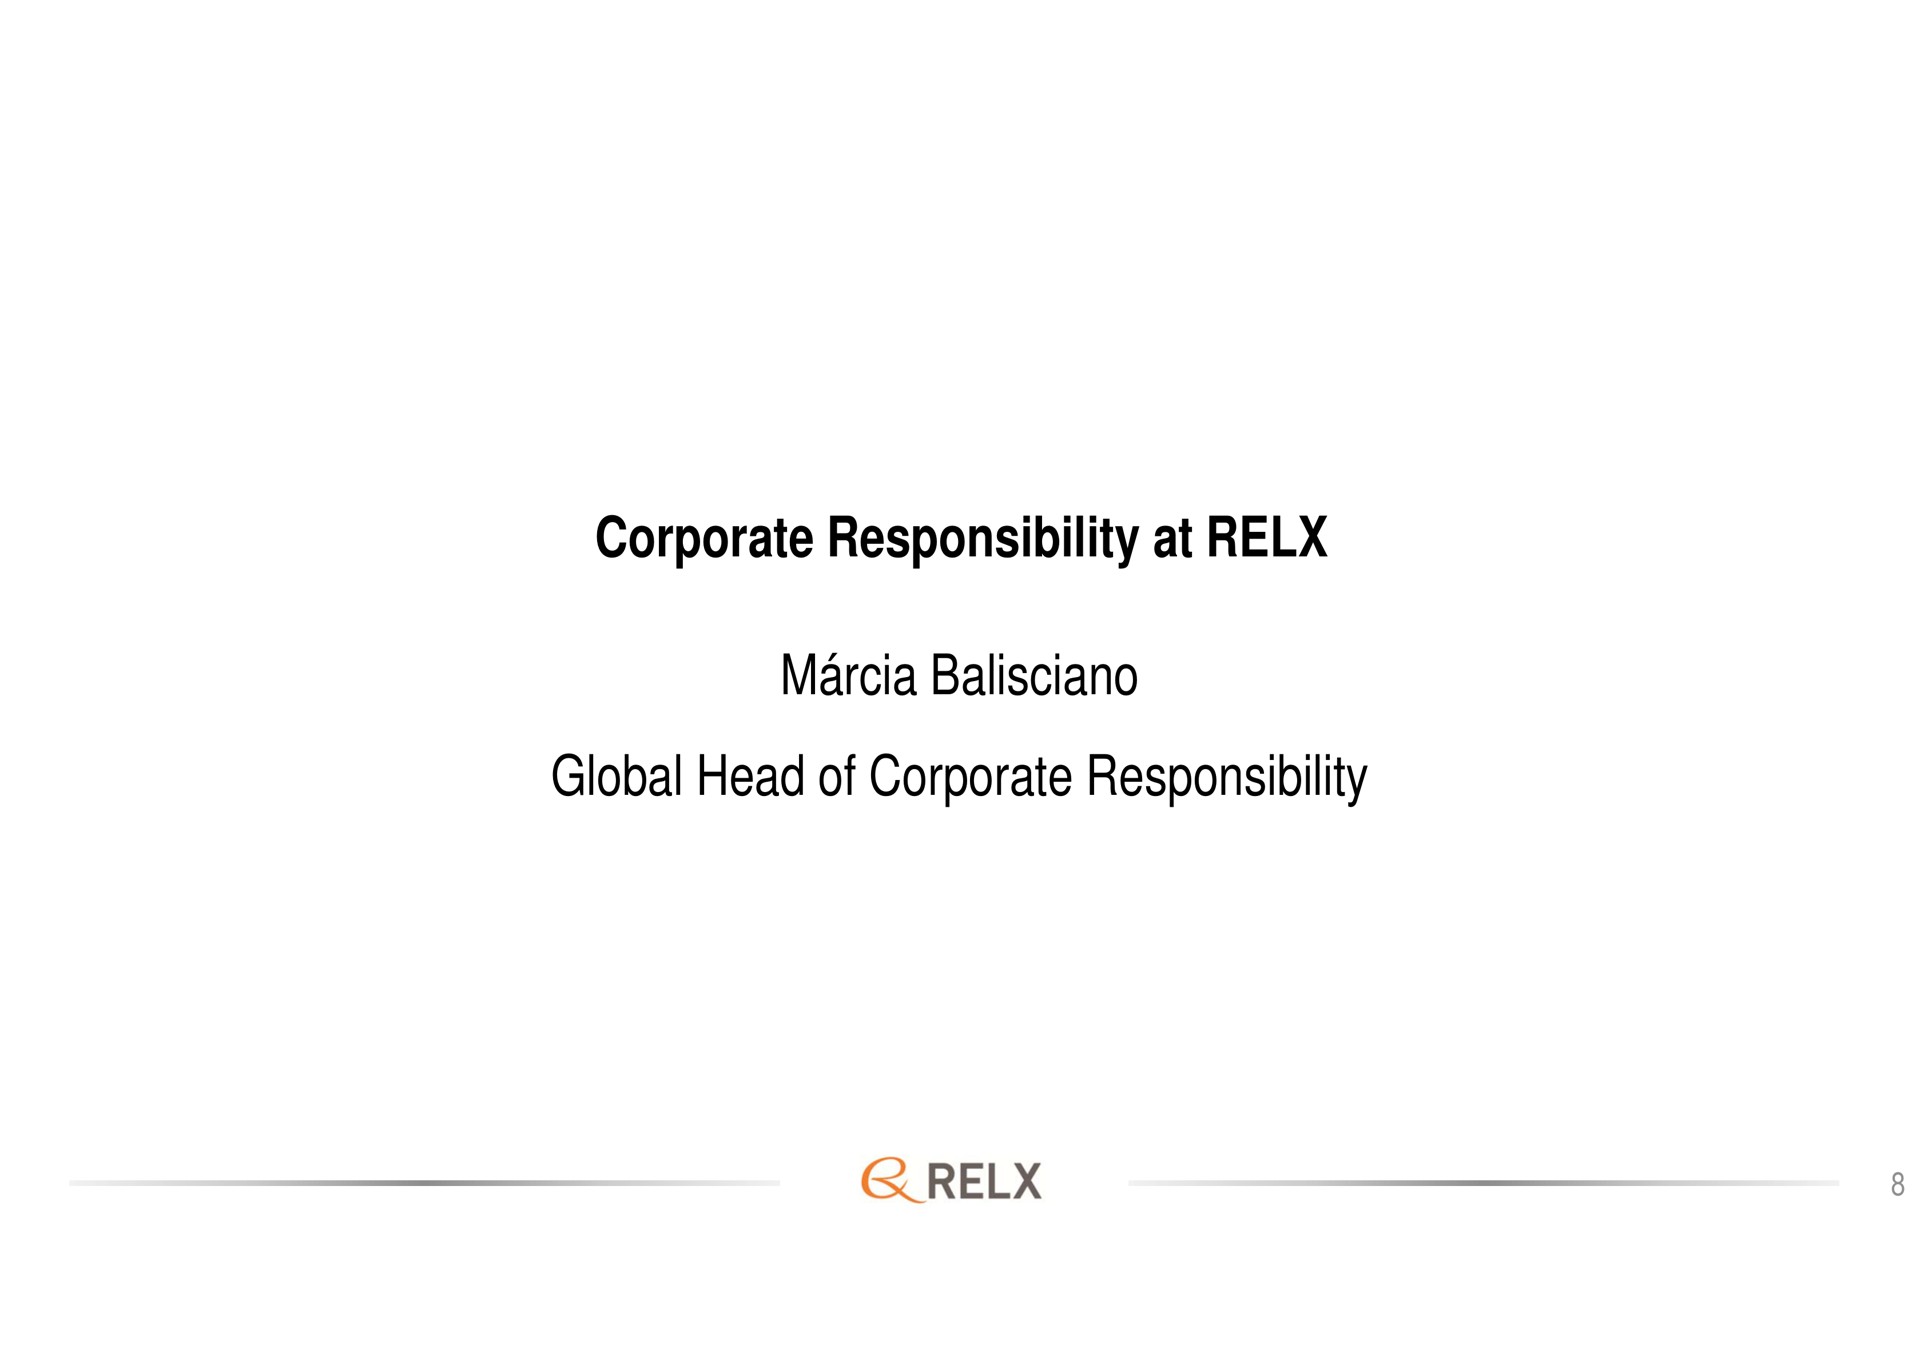 corporate responsibility at global head of corporate responsibility | RELX